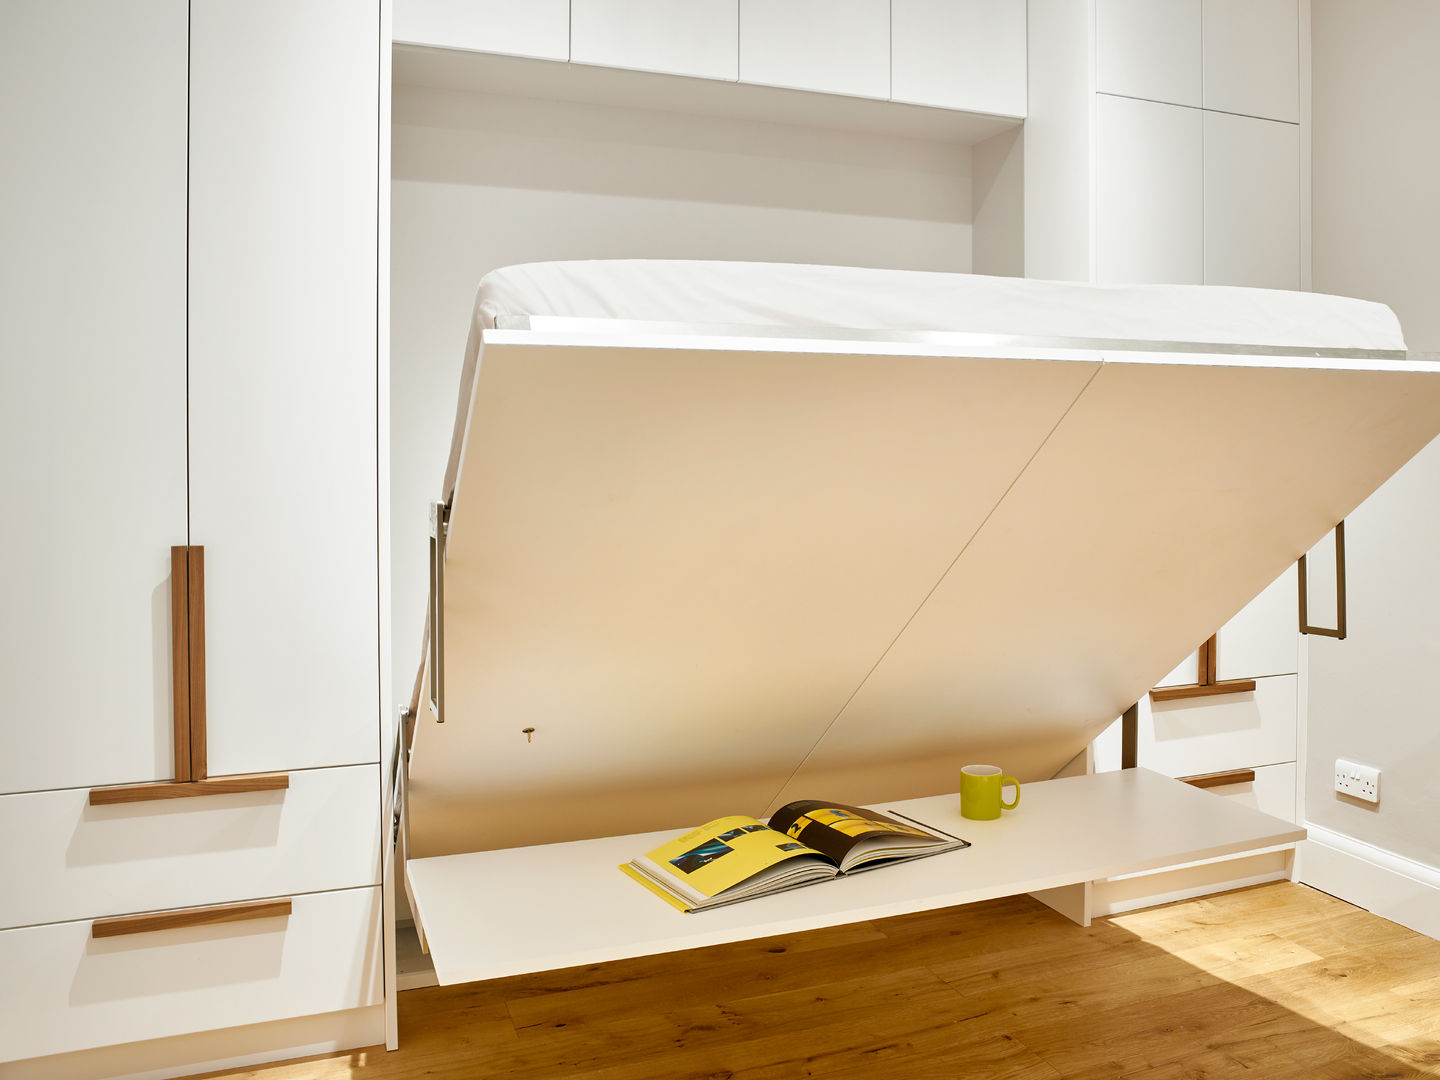 Guest bedroom Morph Interior Ltd Quartos modernos Joinery,drop down bed,guest bed,bed,pull down bed,desk,white